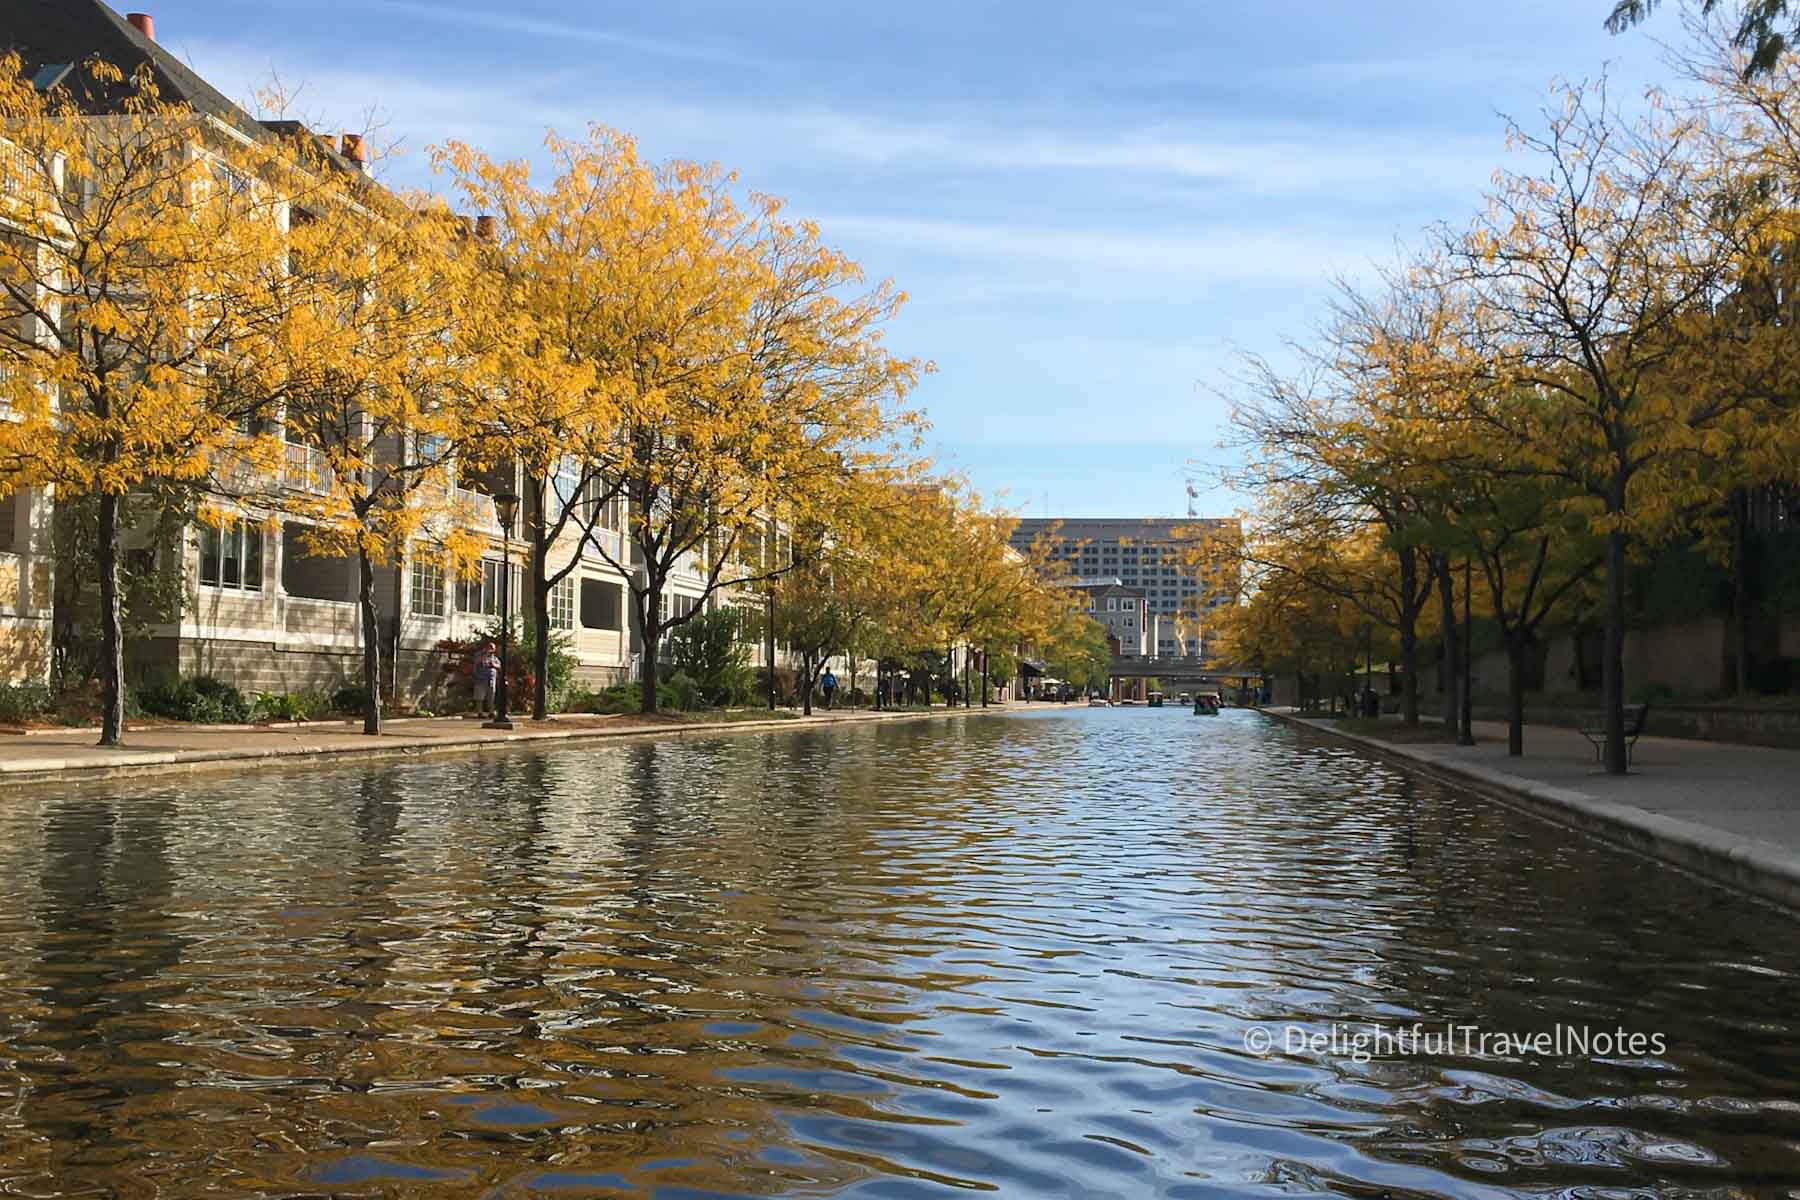 scenery along the center canal in Indianapolis